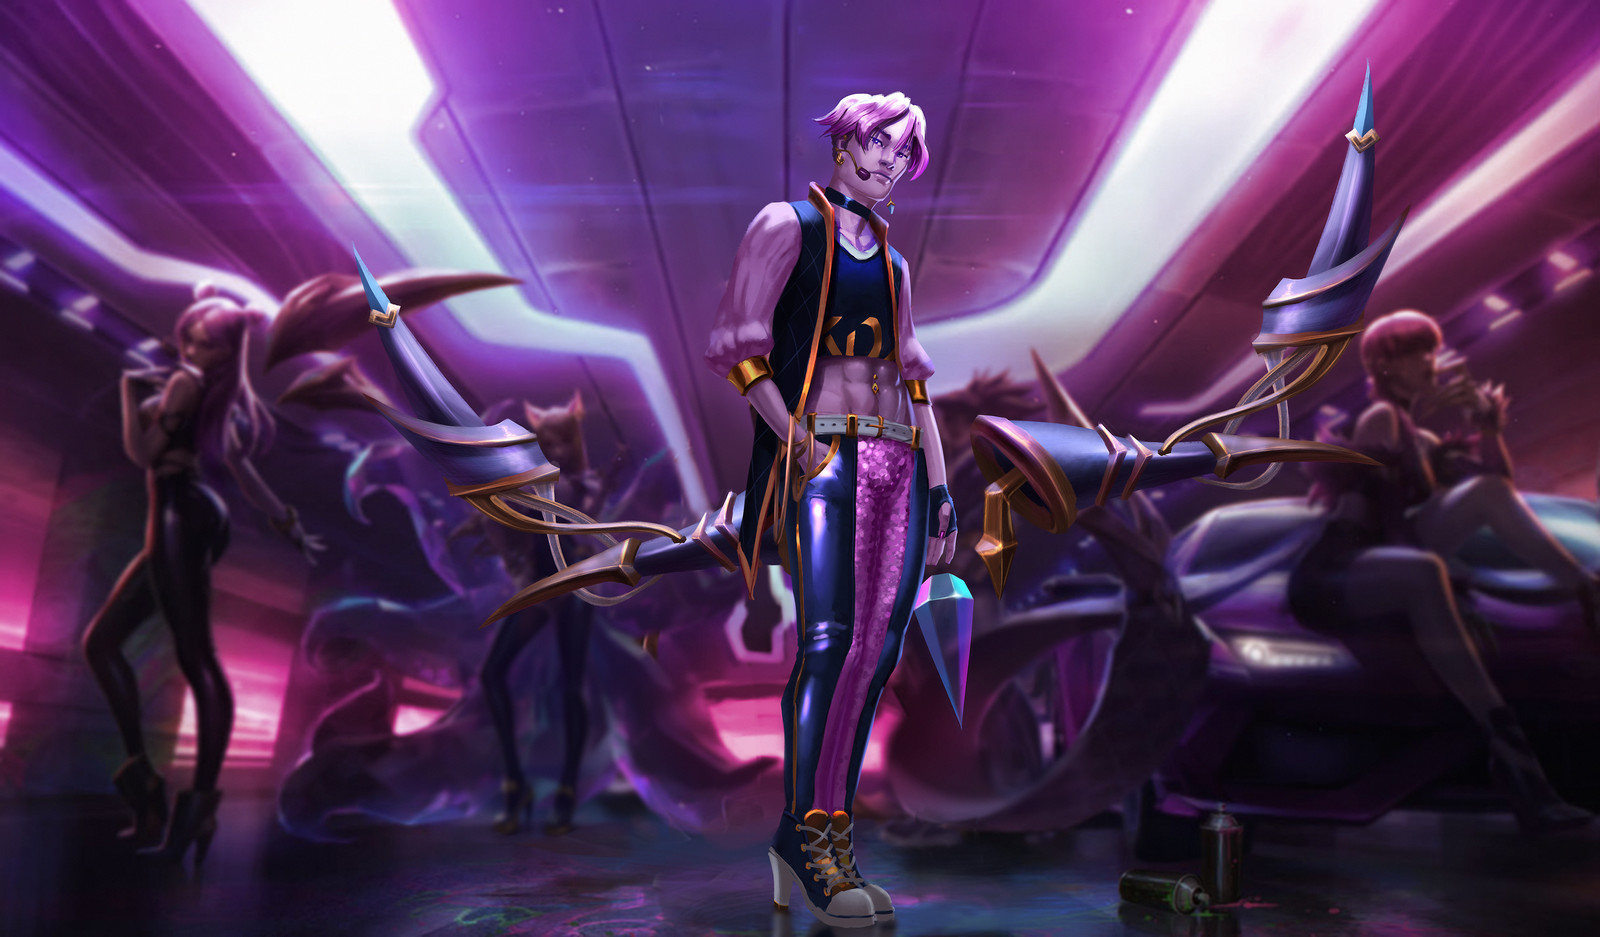 edited official splash art by Riot games to include my Varus fan art